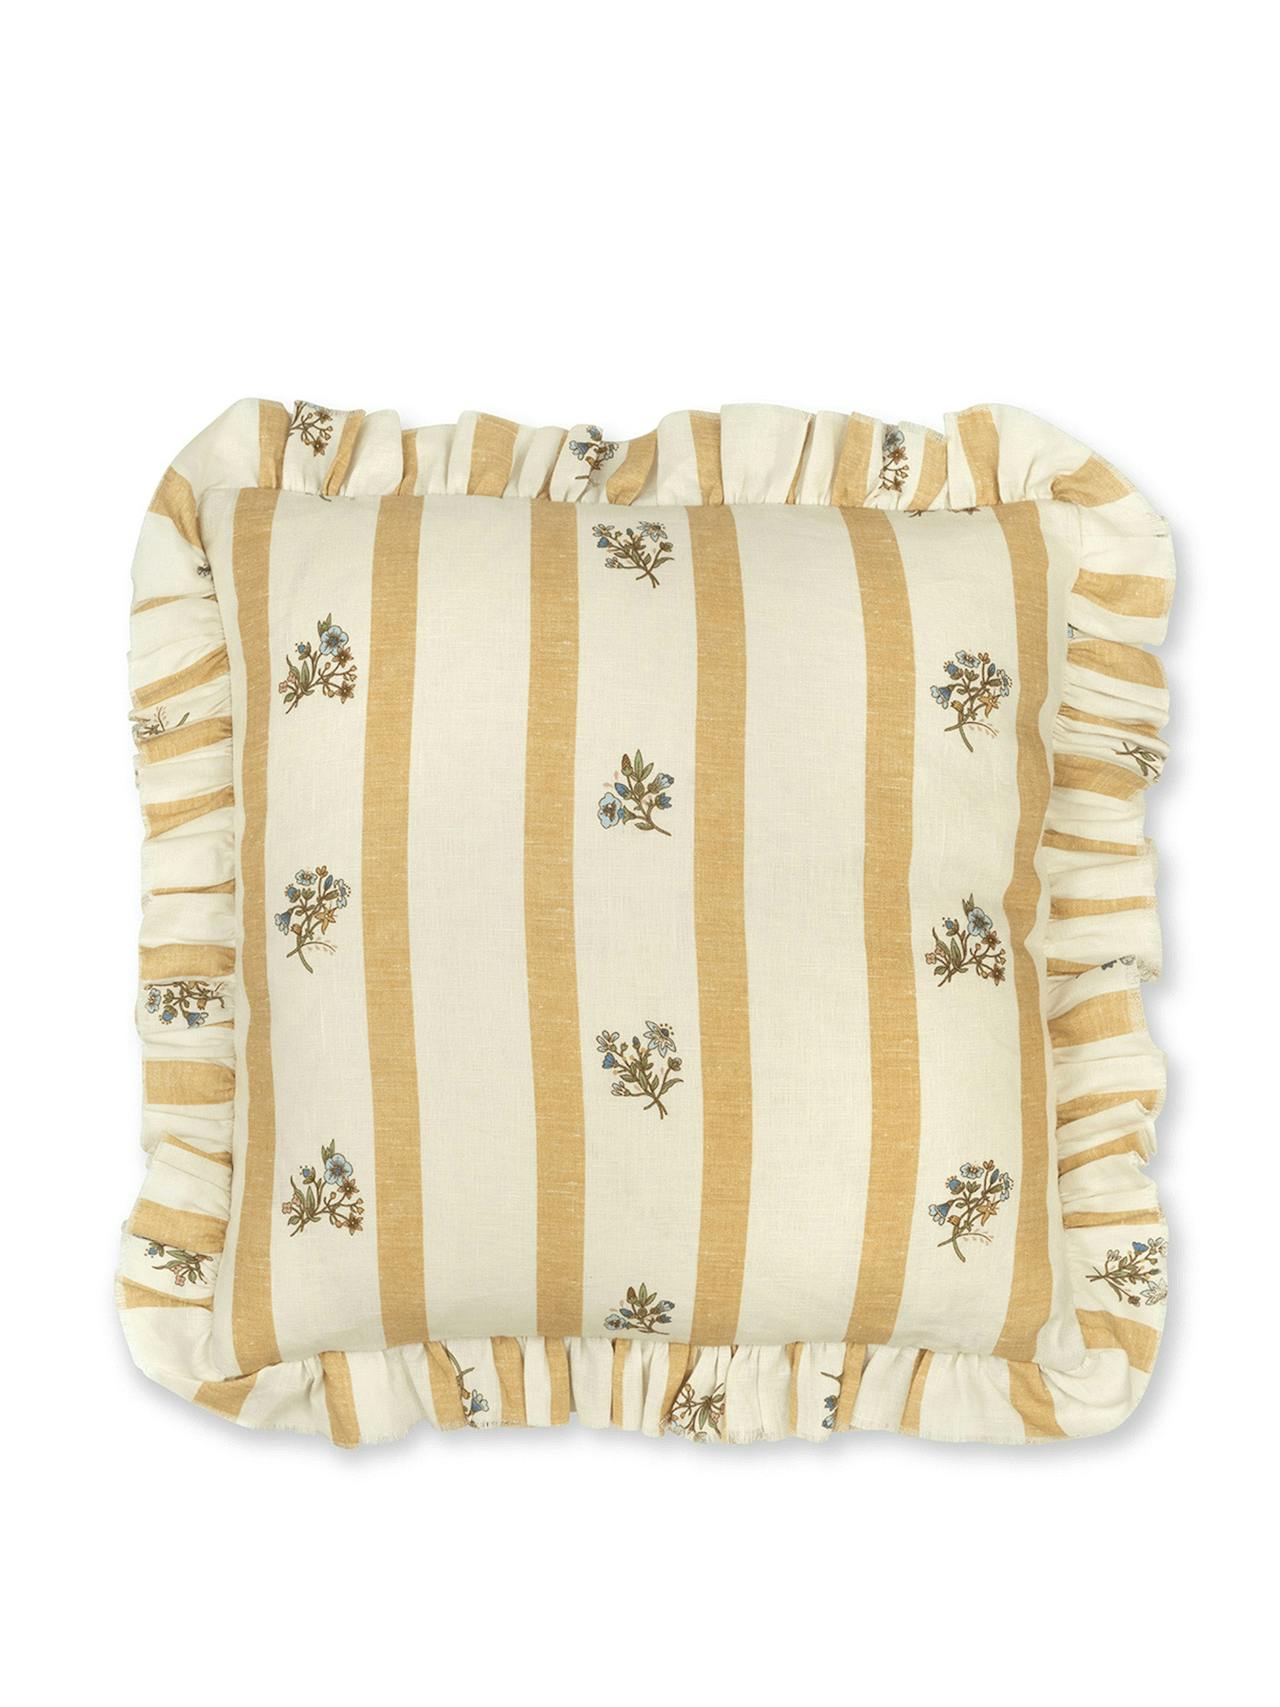 Flax and field posy stripe cushion in ochre with frill